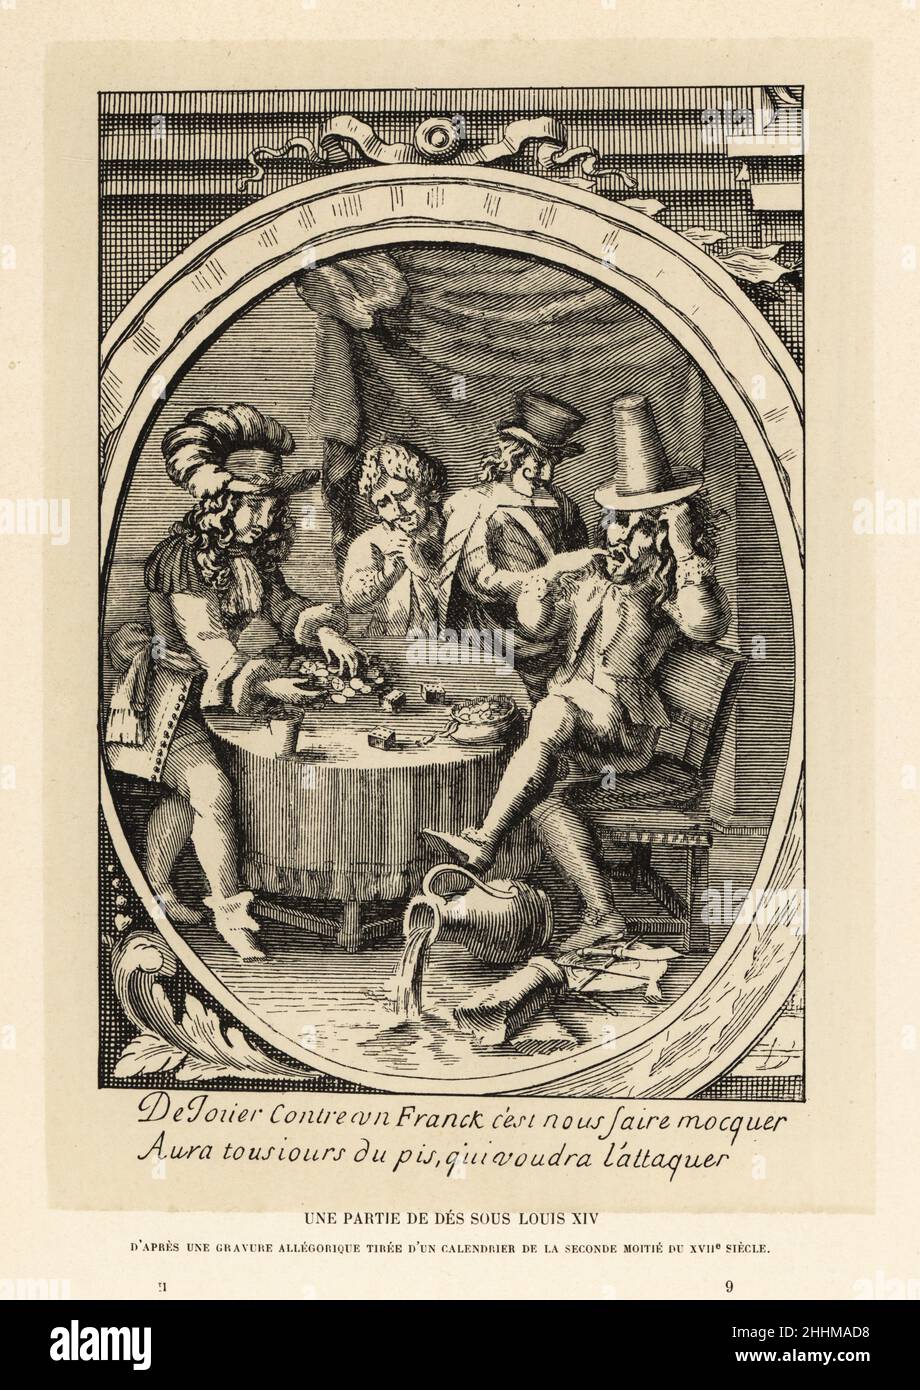 King Louis XIV depicted playing dice at a gaming table. The winner pulls a mound of coins toward him, while the loser kicks over a jug of wine on the floor, After an allegorical engraving in a calendar, second half of 17th century. Une partie de des sous Louis XIV. Lithograph from Henry Rene d’Allemagne’s Recreations et Passe-Temps, Games and Pastimes, Hachette, Paris, 1906. Stock Photo